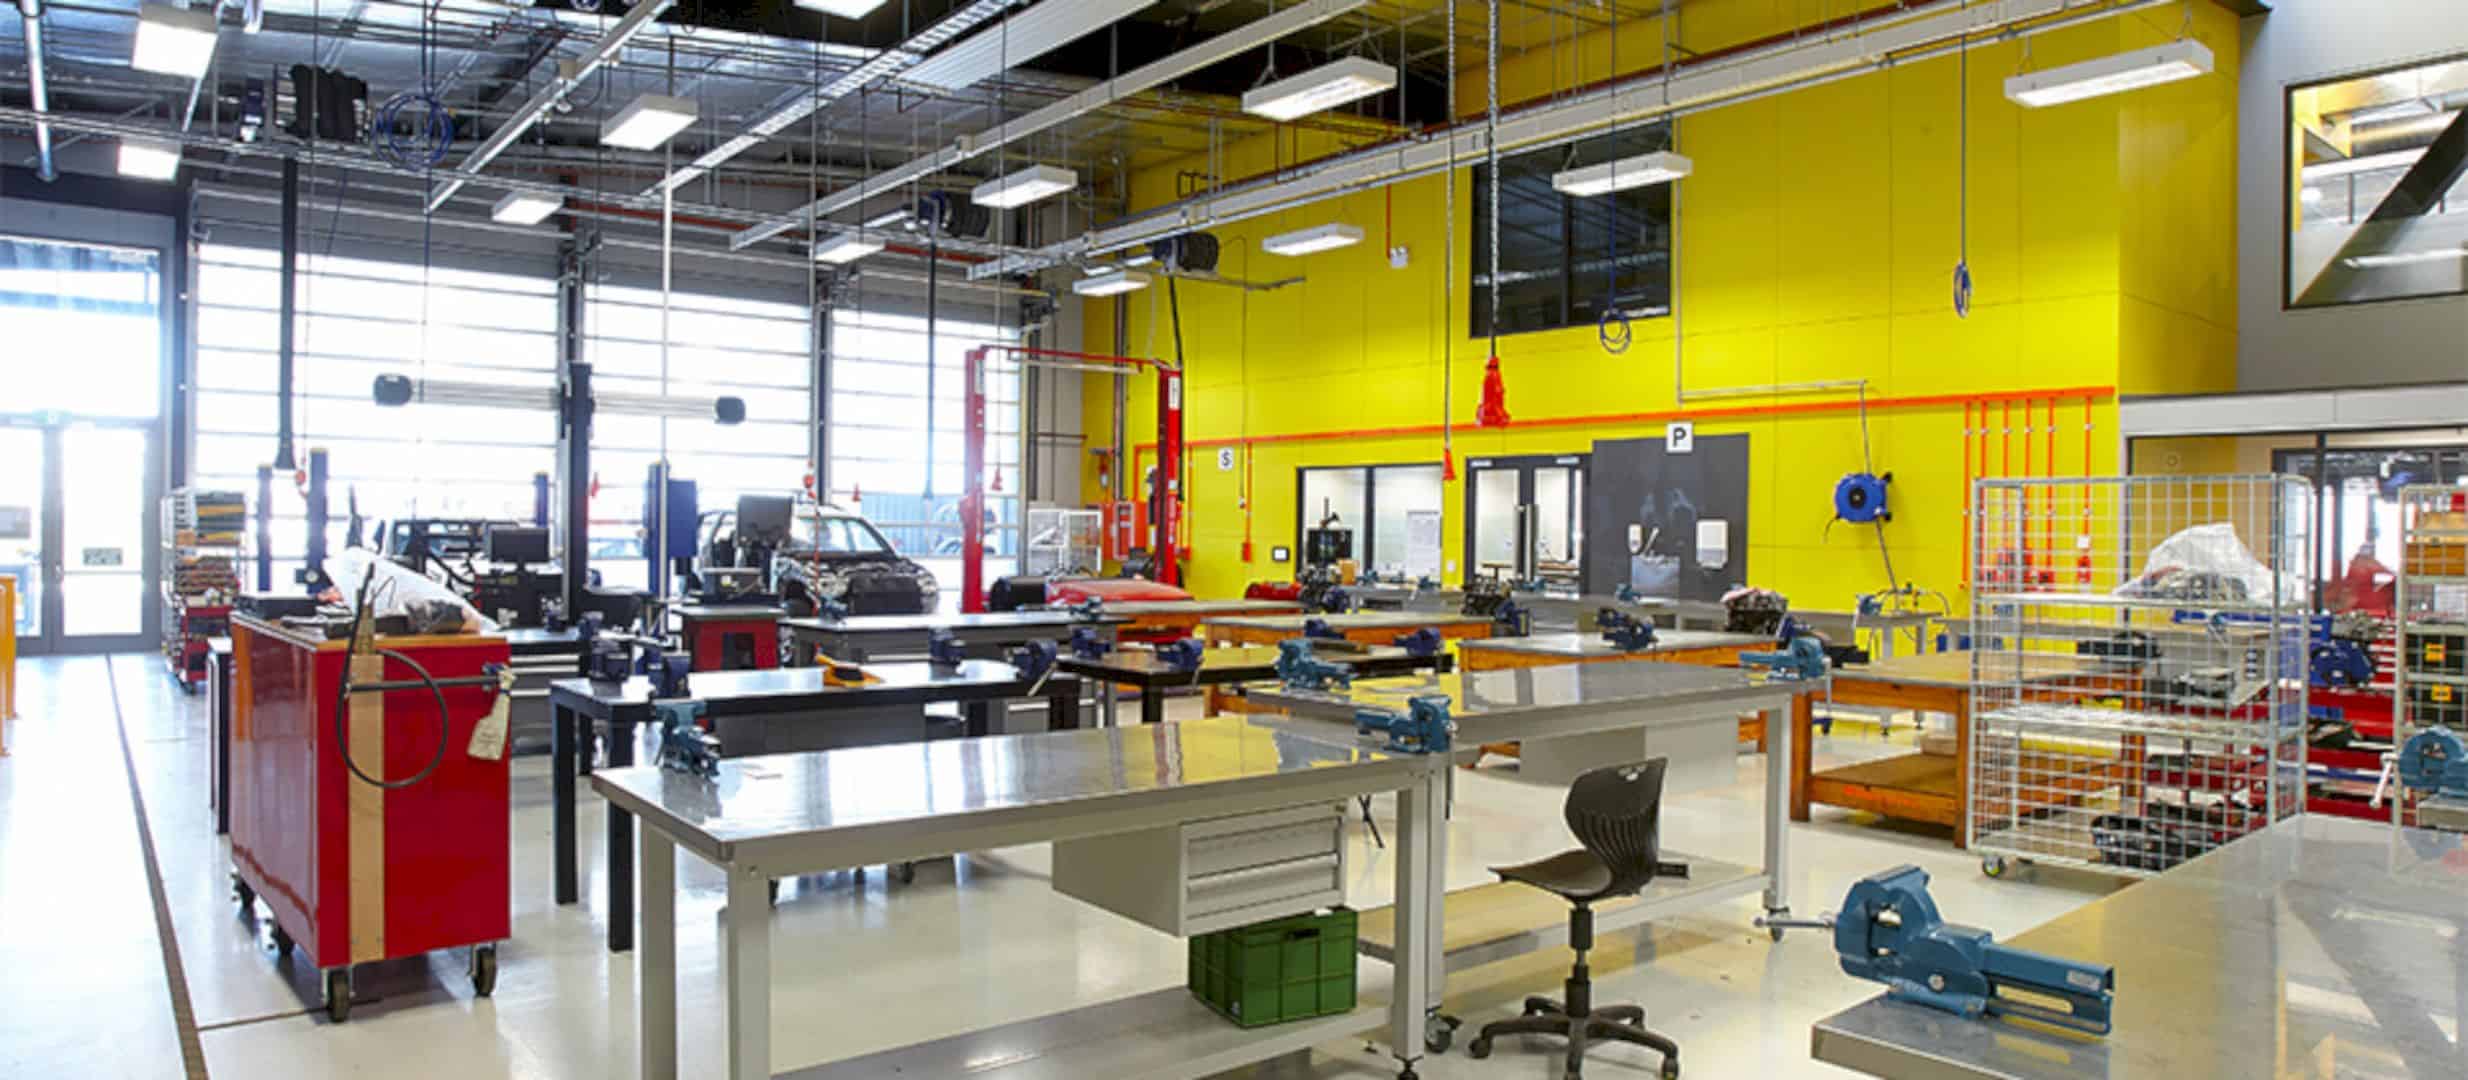 Wintec Engineering And Trades Facility A Facility That Leads The Way For Change 2